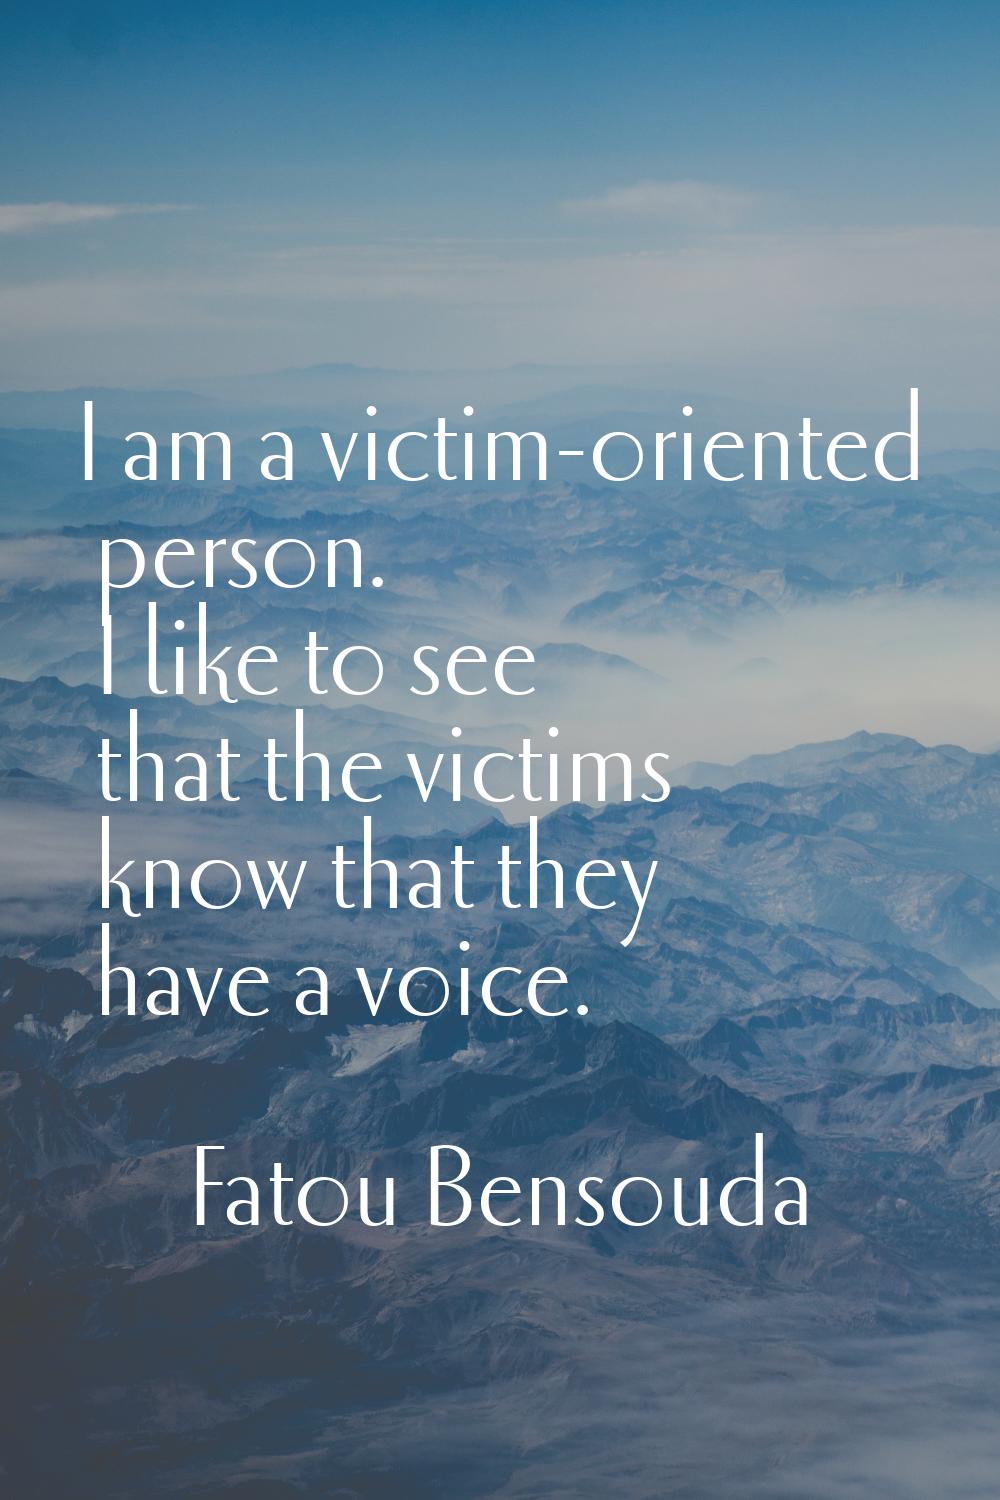 I am a victim-oriented person. I like to see that the victims know that they have a voice.